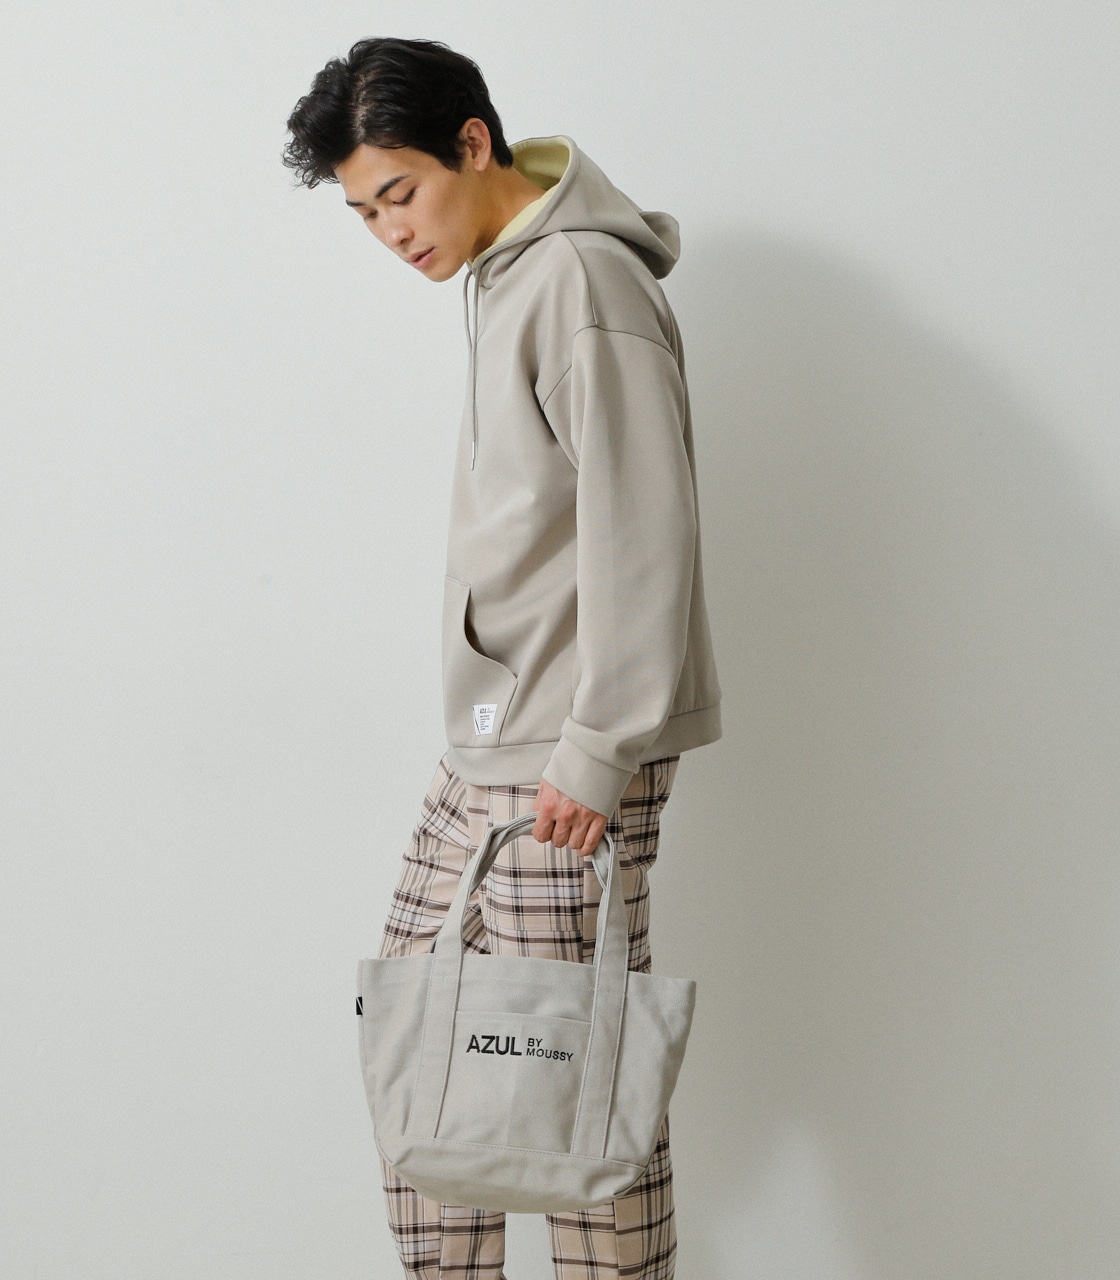 AZUL CANVAS TOTE BAG/AZULキャンバストートバッグ 詳細画像 L/GRY 8